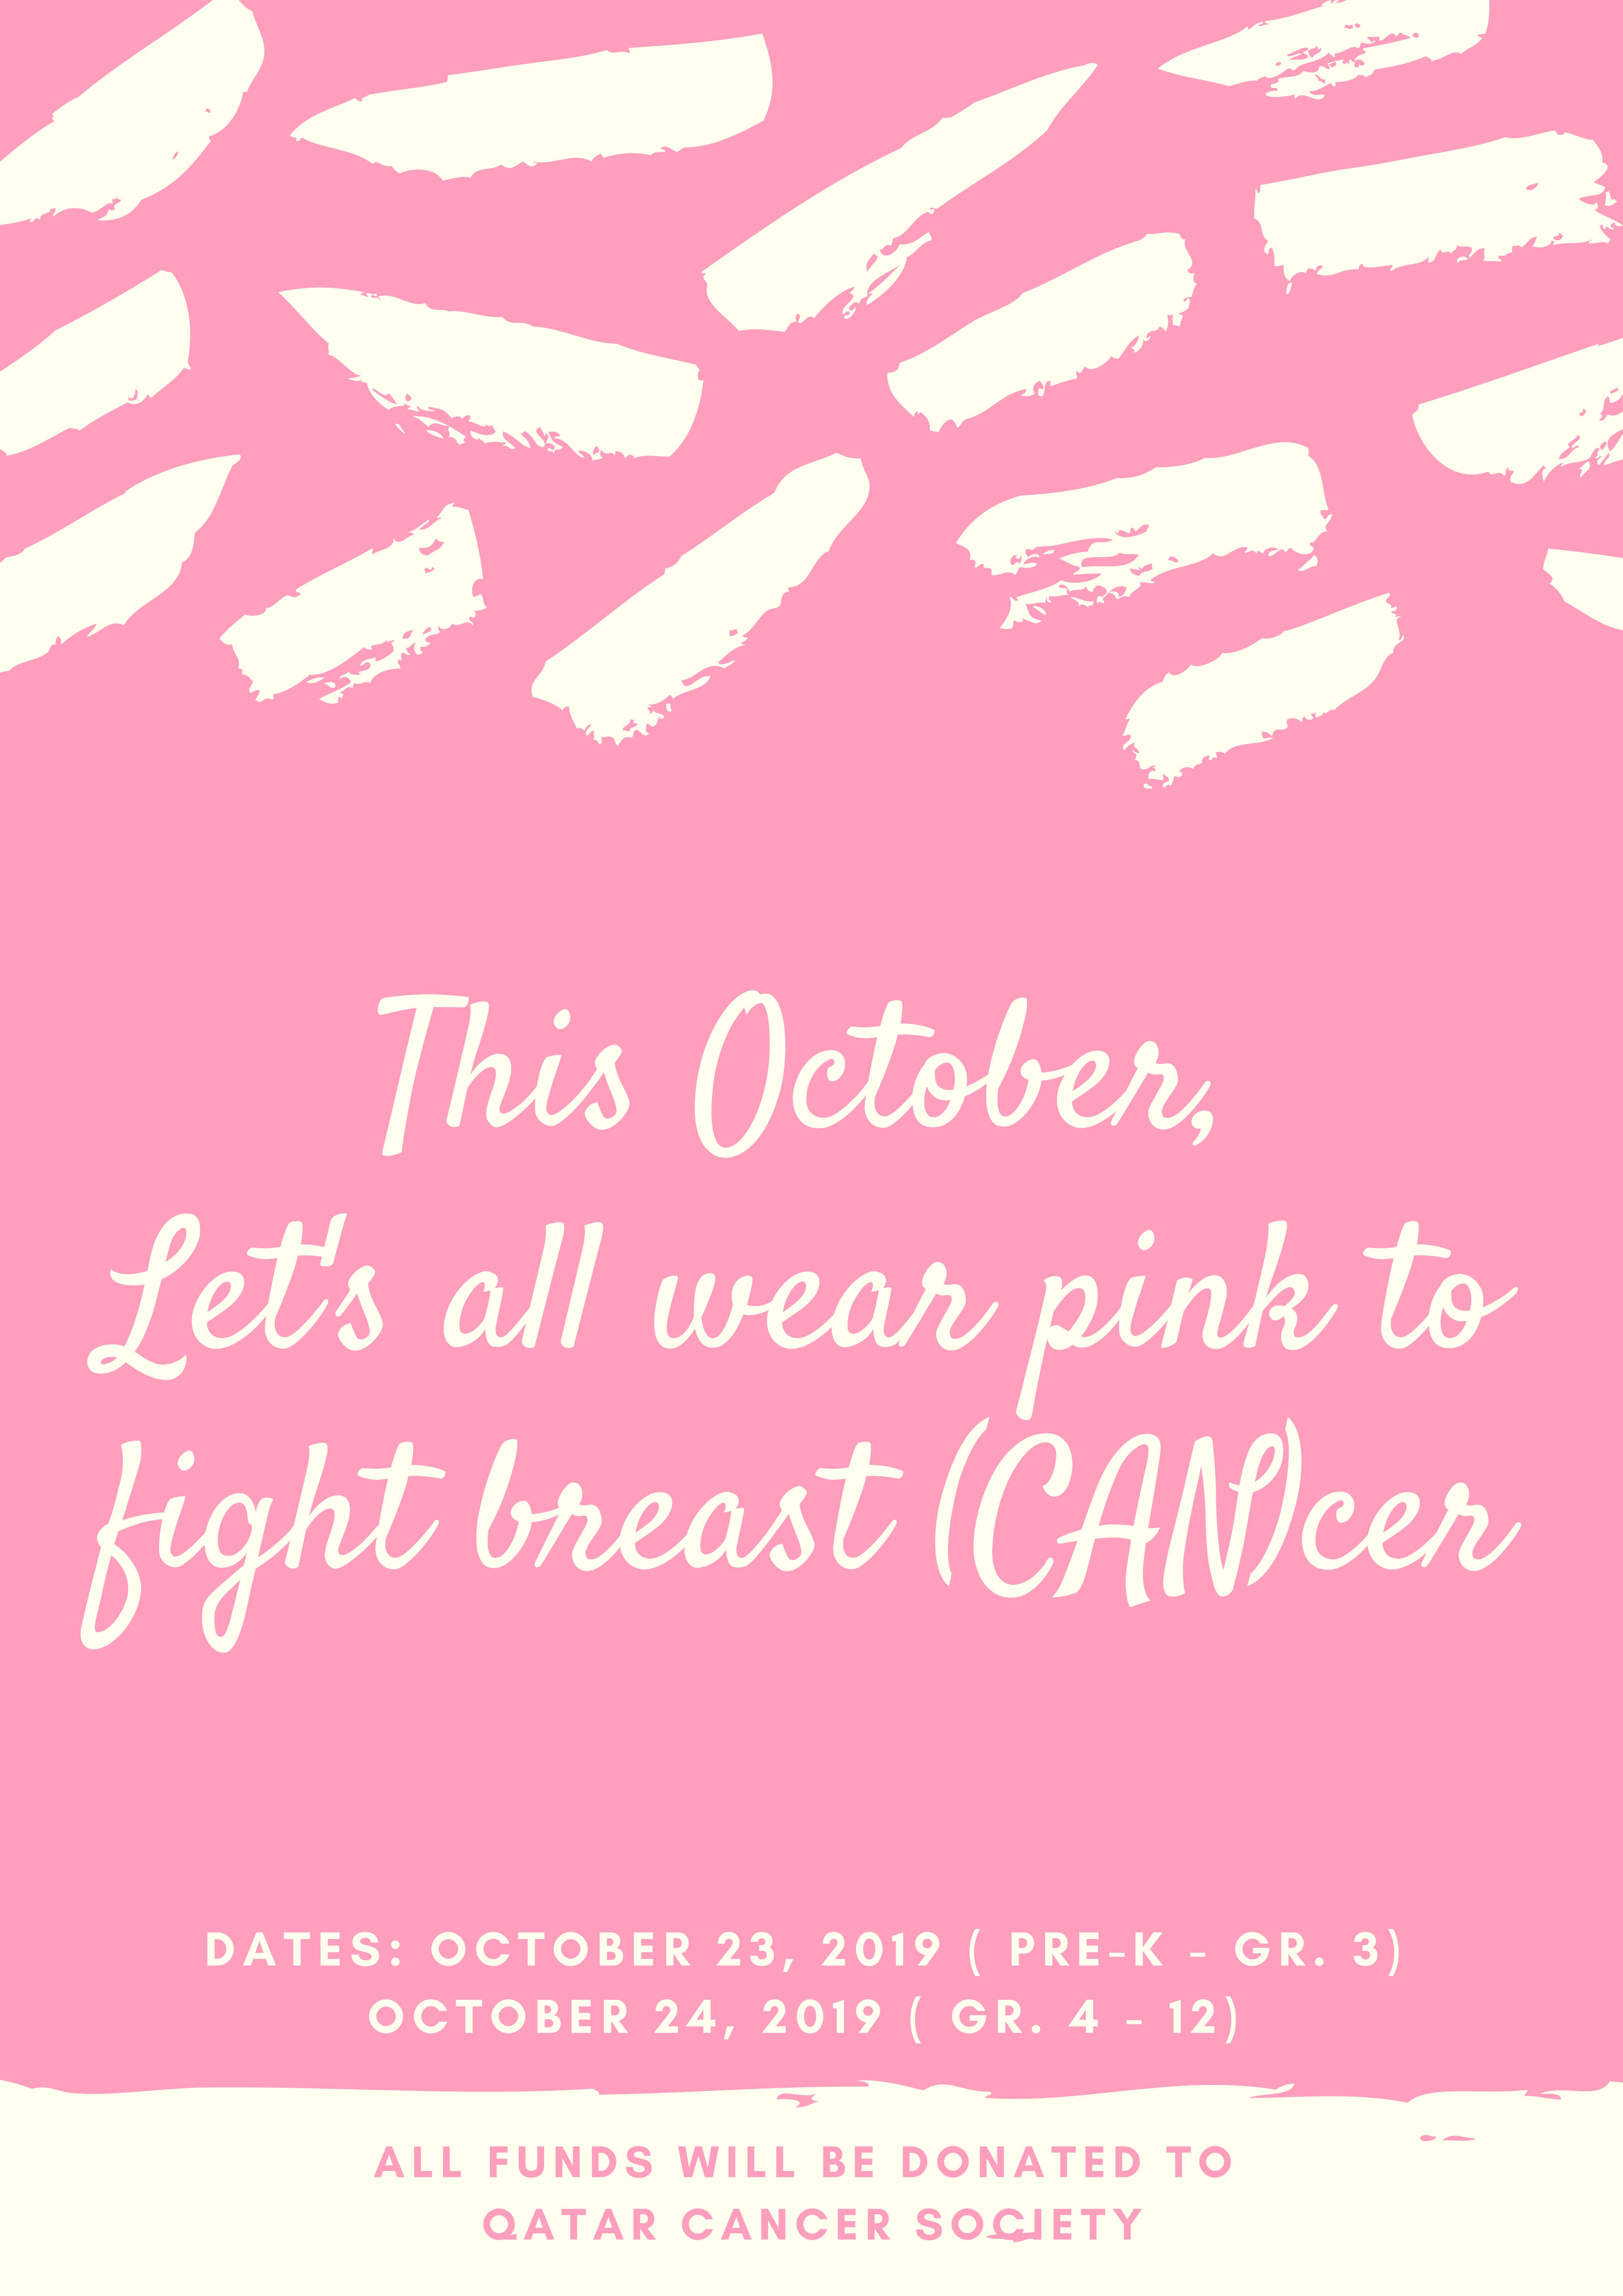 Breast cancer awareness day